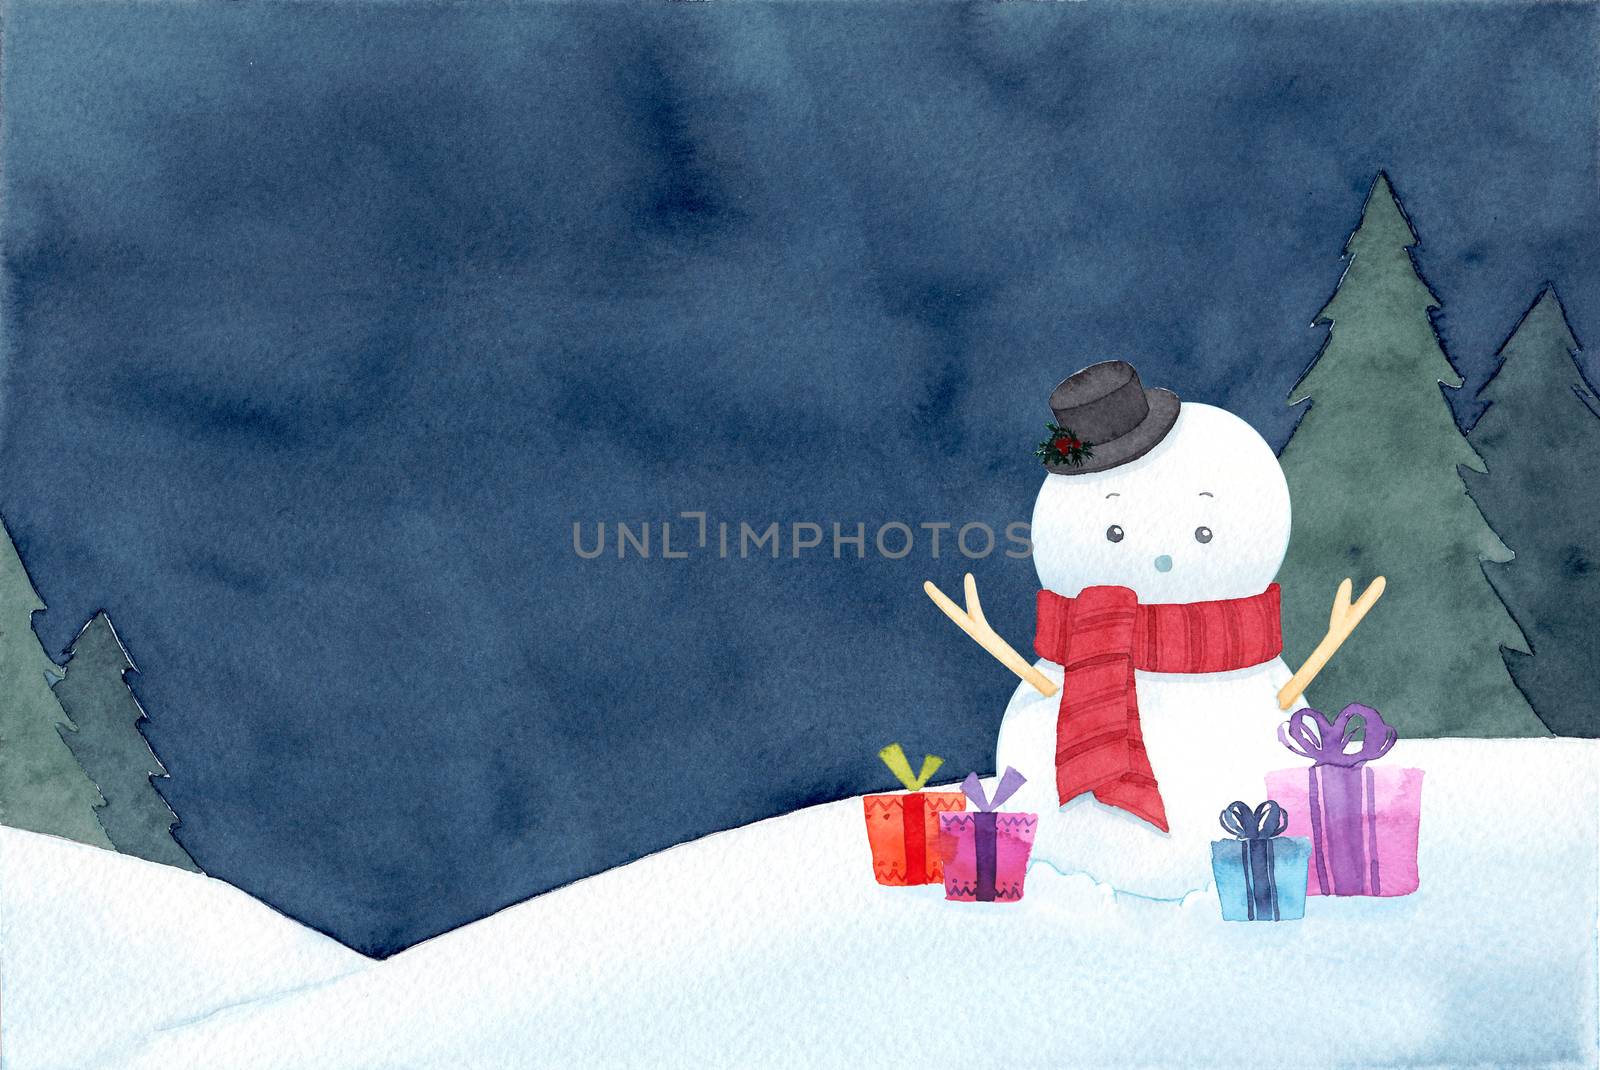 A snowman with hat and red scarf. Calm night winter scenery background. Watercolor hand painting illustration. Design for winter, Christmas, New year. by Ungamrung